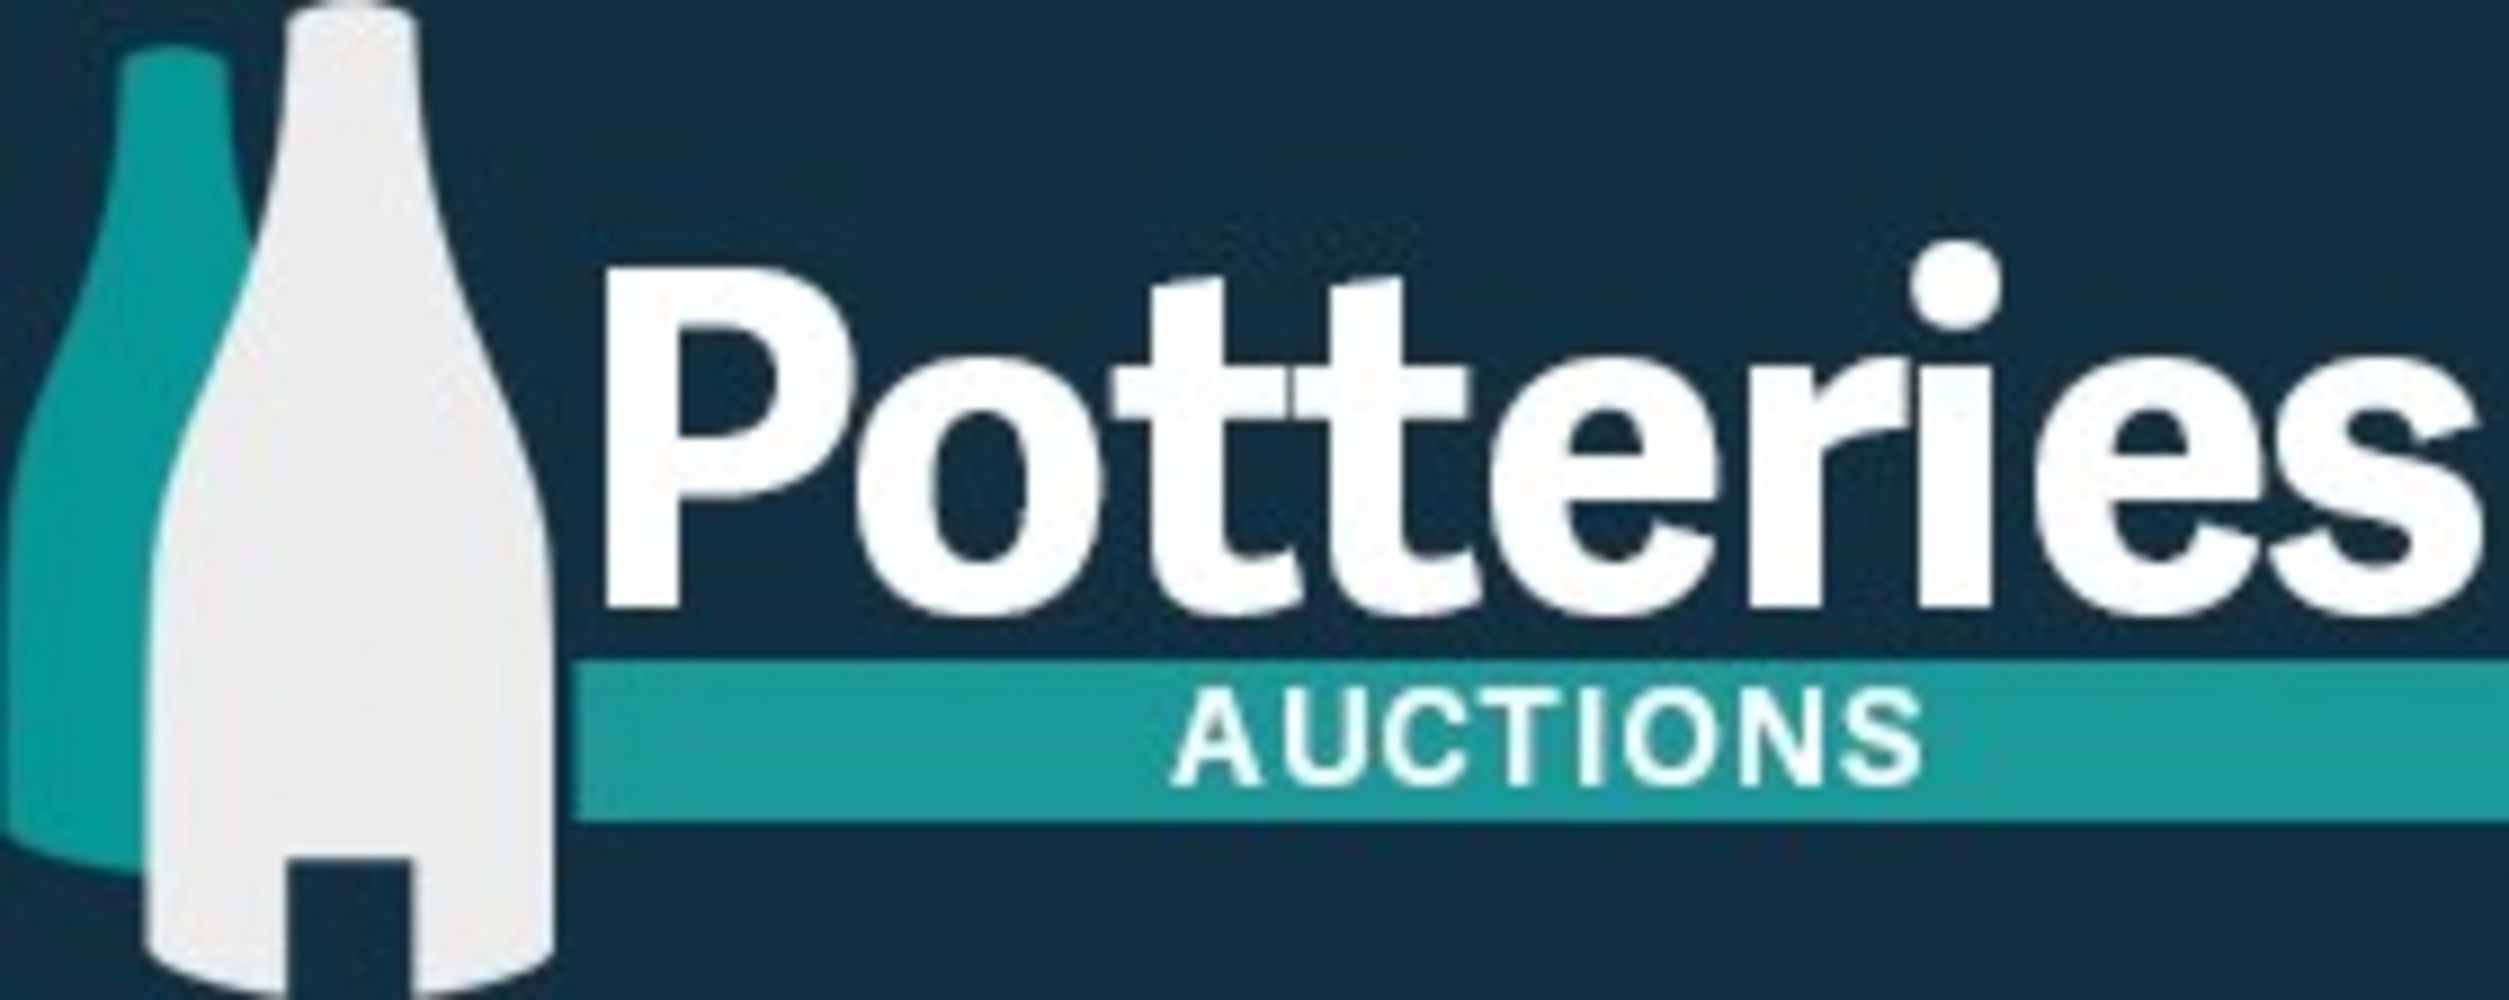 COBRIDGE SALEROOM, ST6 3HR - September 2022 Auction of unreserved Items, British Pottery, Furniture & Household Items. - Potteries Auctions